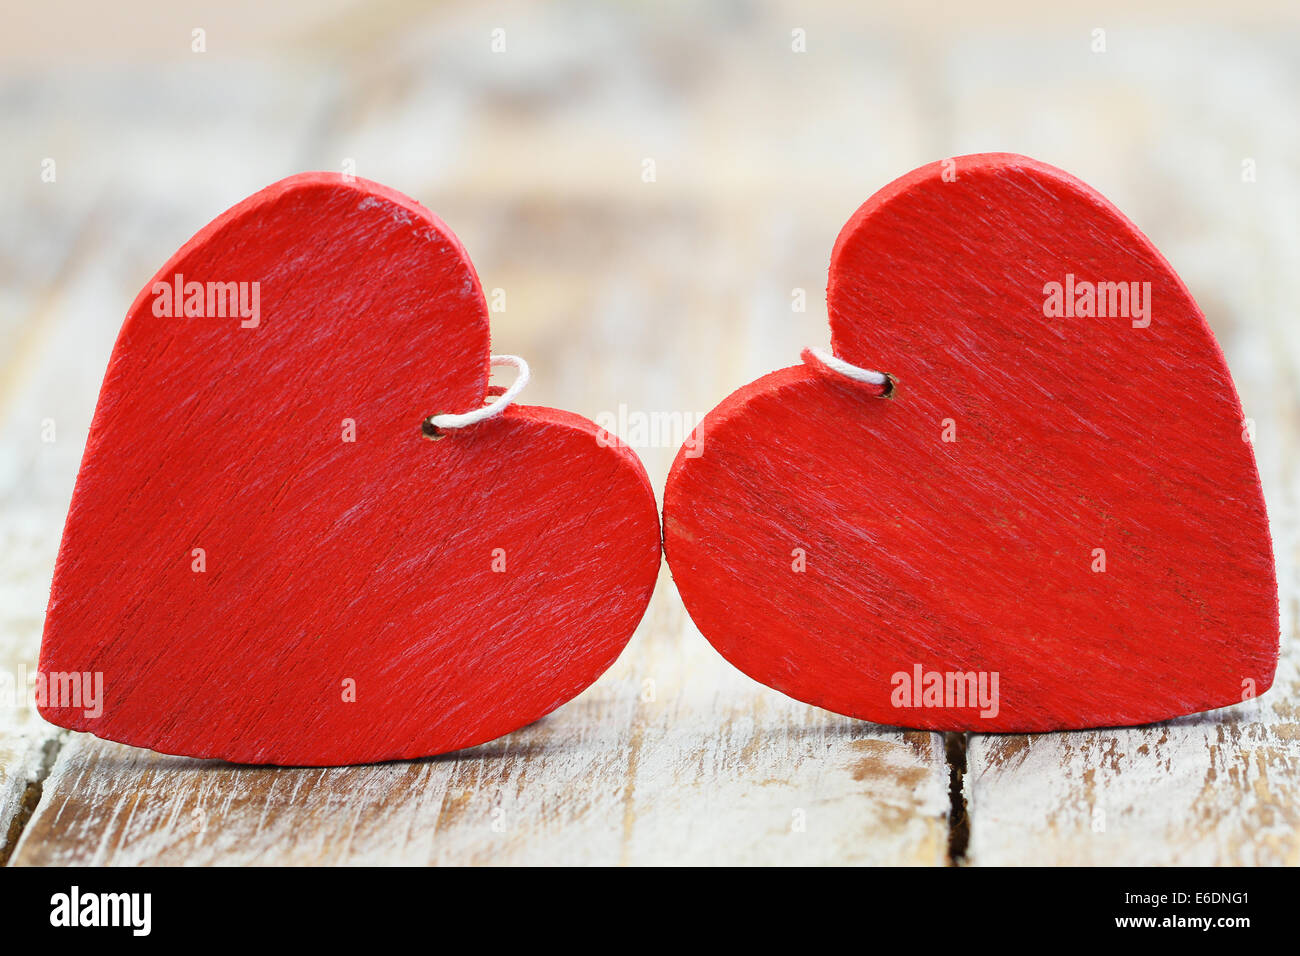 Two red wooden hearts on wooden surface Stock Photo